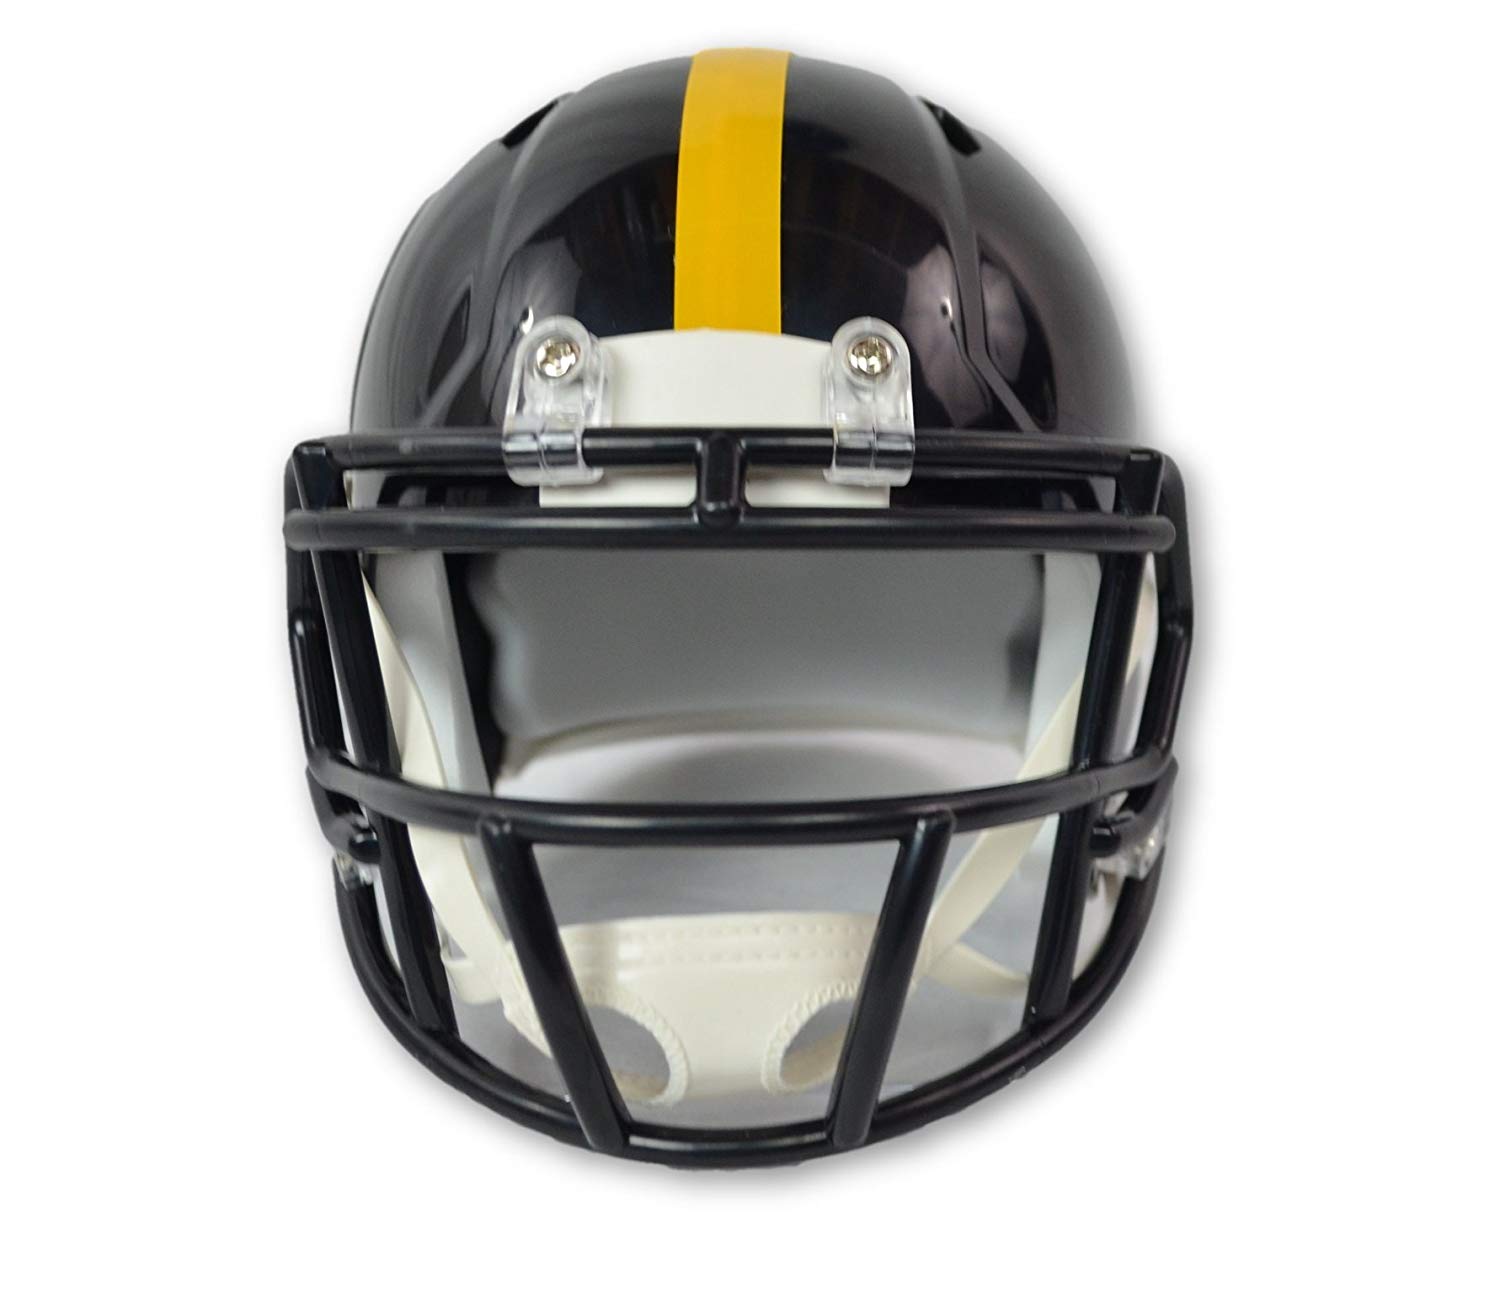 Official National Football League Fan Shop Authentic NFL Mini Speed Helmet and Display Case Bundle. Great Sports Fan Collectible - Office, Home or Man Cave